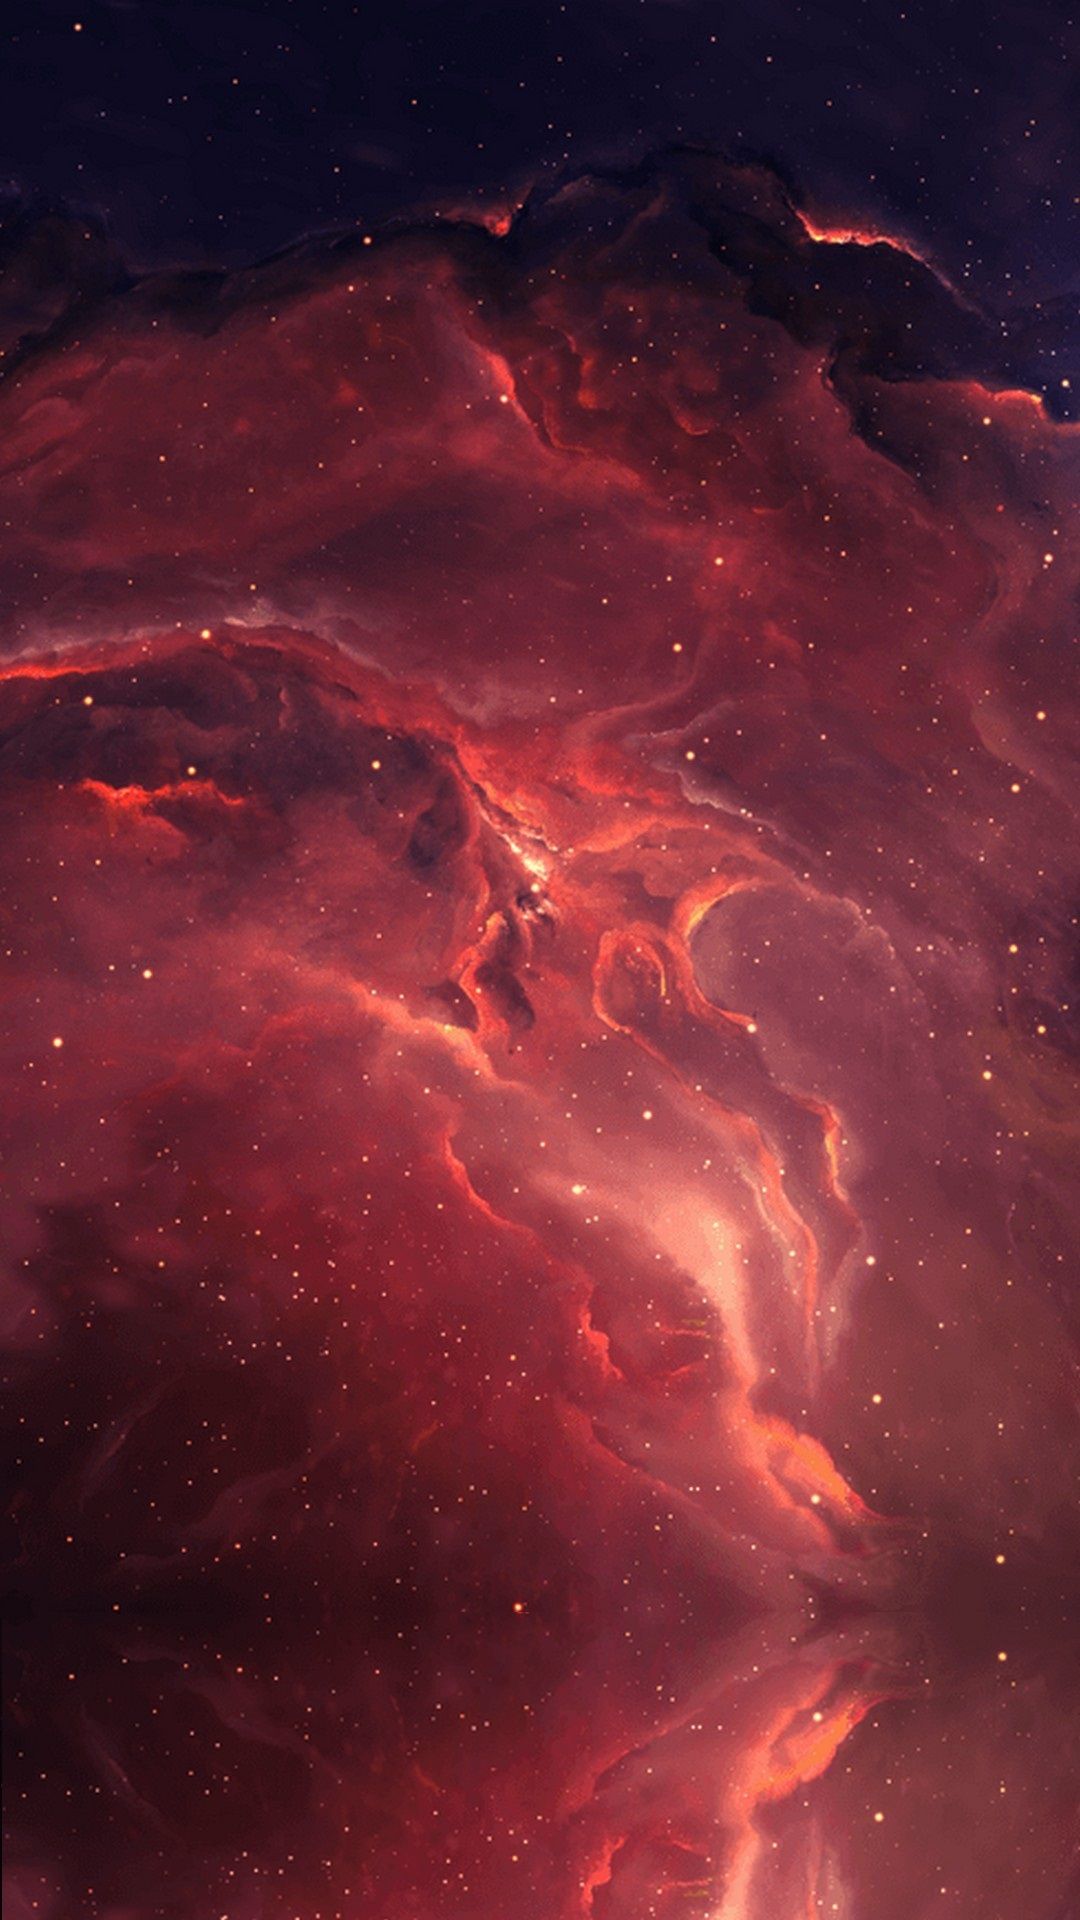 Space Iphone Wallpapers Hd posted by Ryan Cunningham